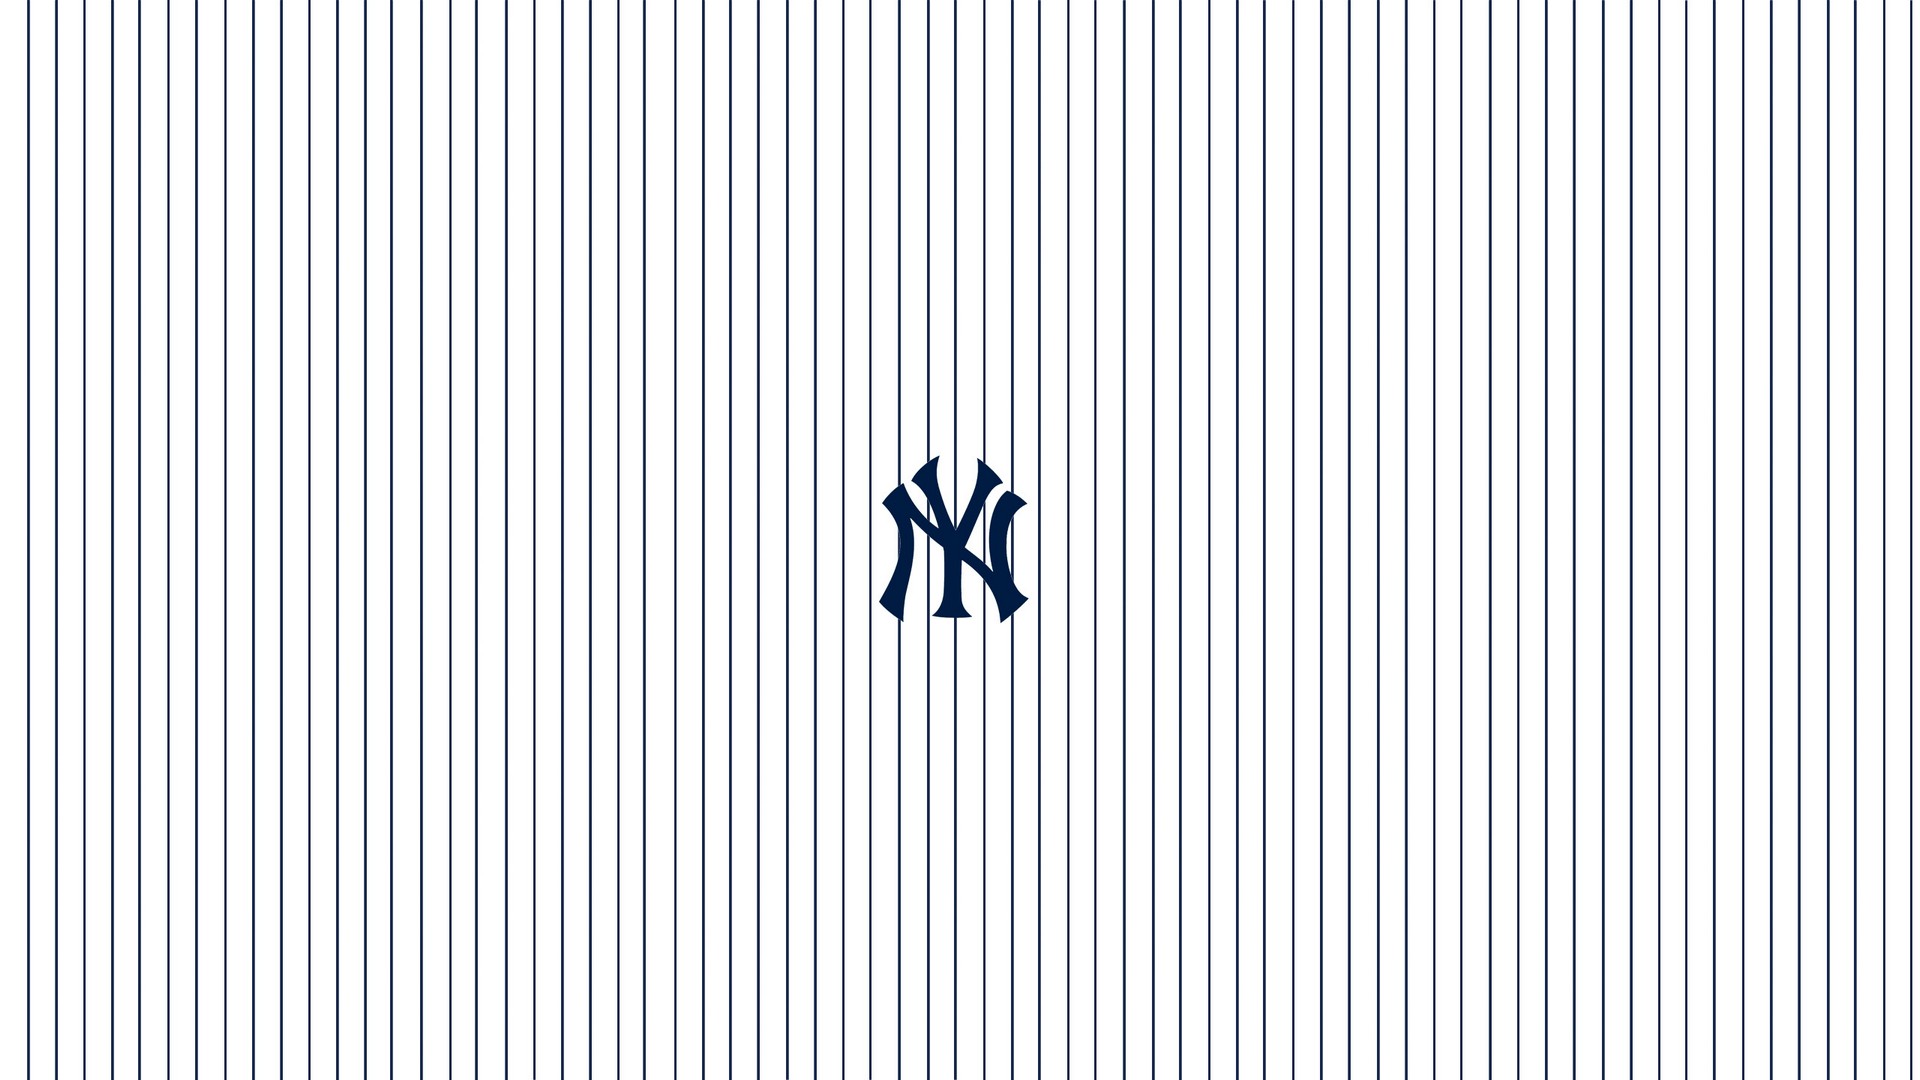 Wallpapers HD NY Yankees with high-resolution 1920x1080 pixel. You can use this wallpaper for Mac Desktop Wallpaper, Laptop Screensavers, Android Wallpapers, Tablet or iPhone Home Screen and another mobile phone device